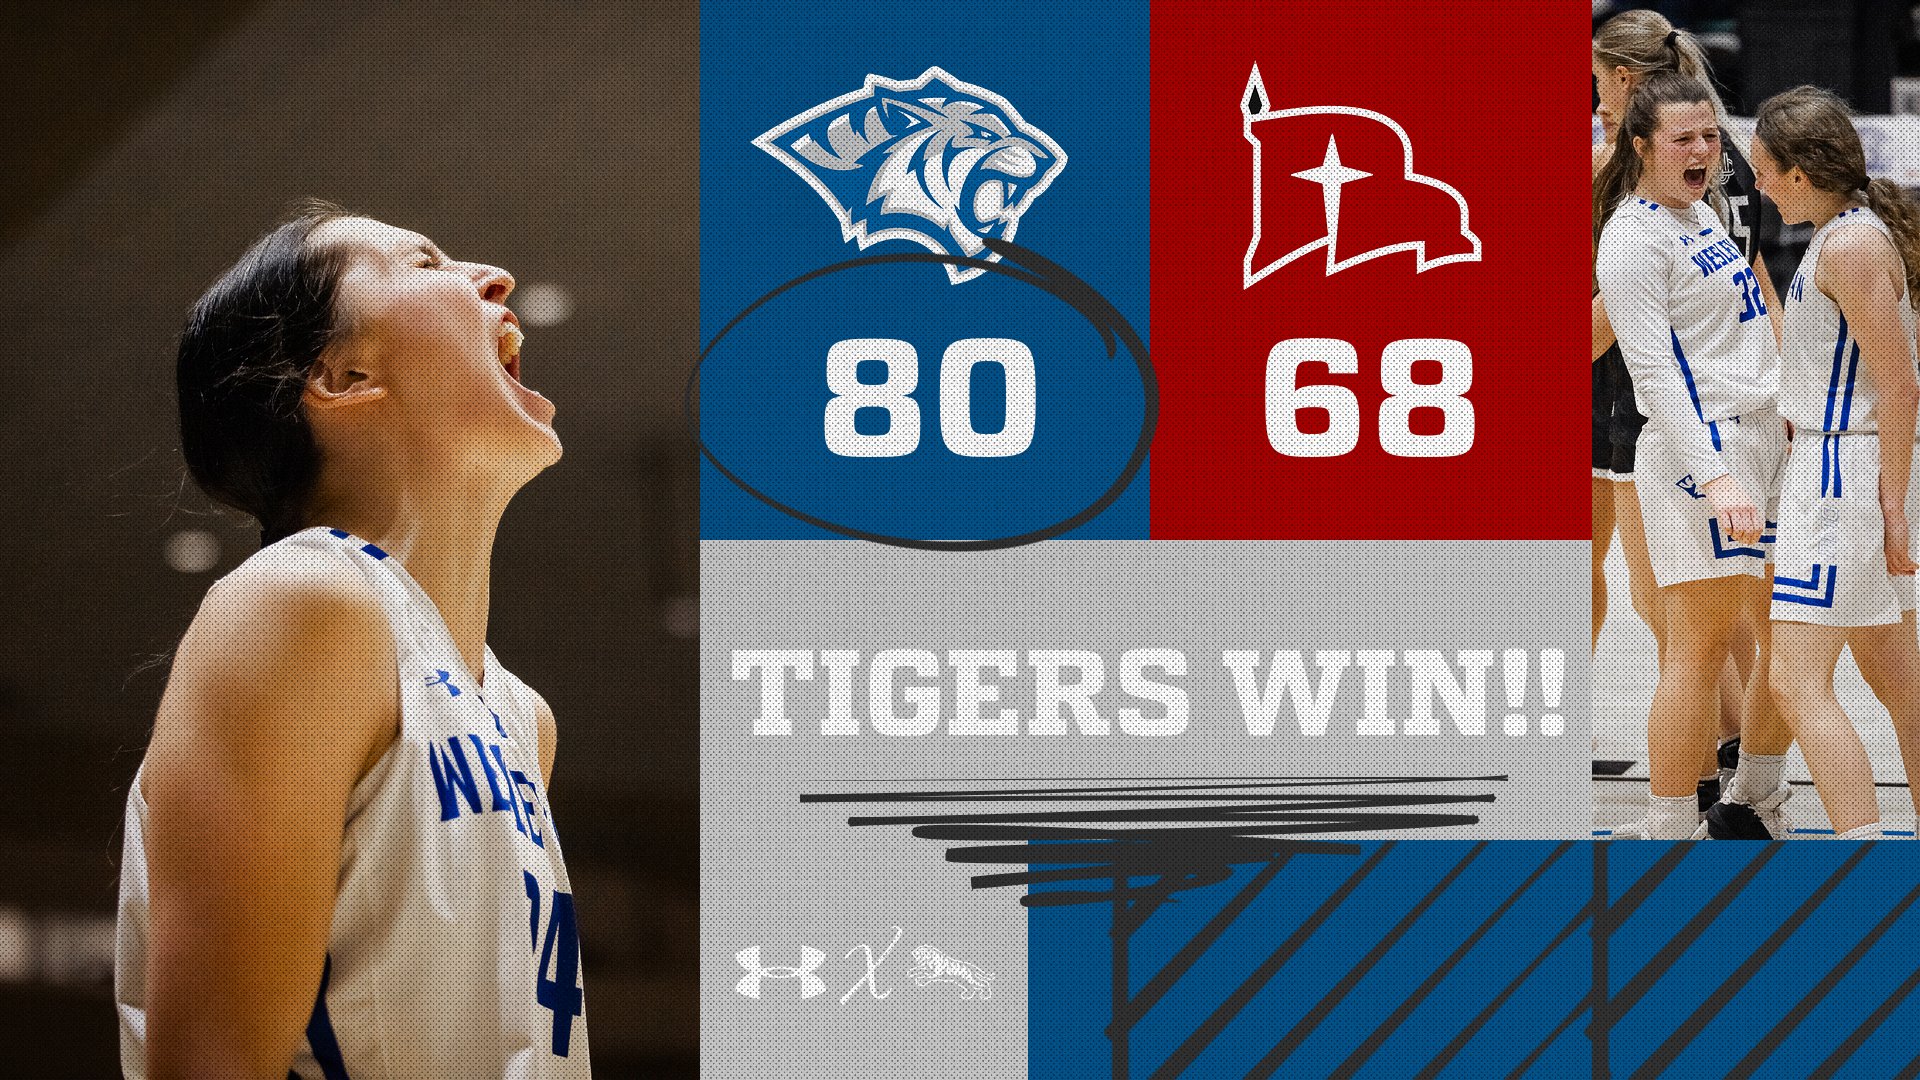 (RV) TIGERS NEVER TRAIL IN 80-68 ROAD WIN AGAINST RED RAIDERS, LED BY ROSENQUIST 21 POINTS